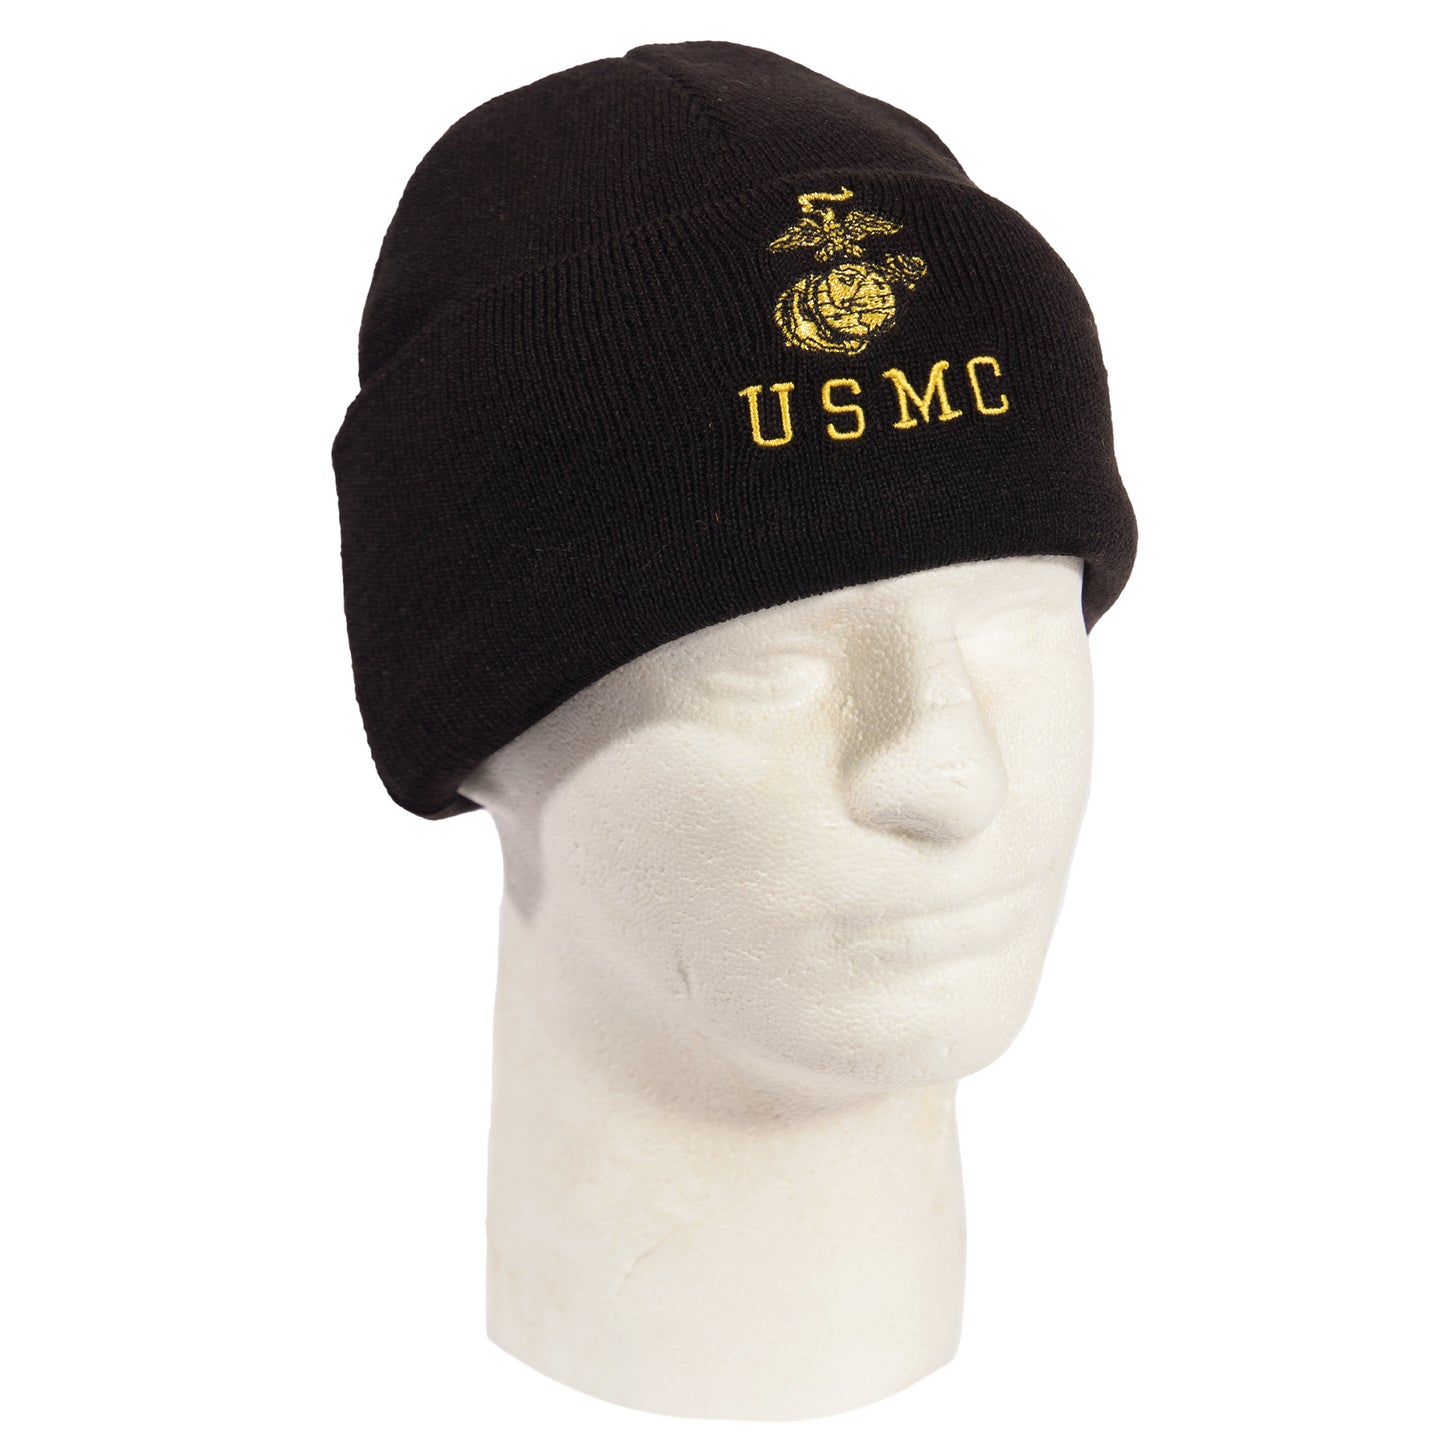 Embroidered USMC Watch Cap with Gold Eagle, Globe, & Anchor Insignia